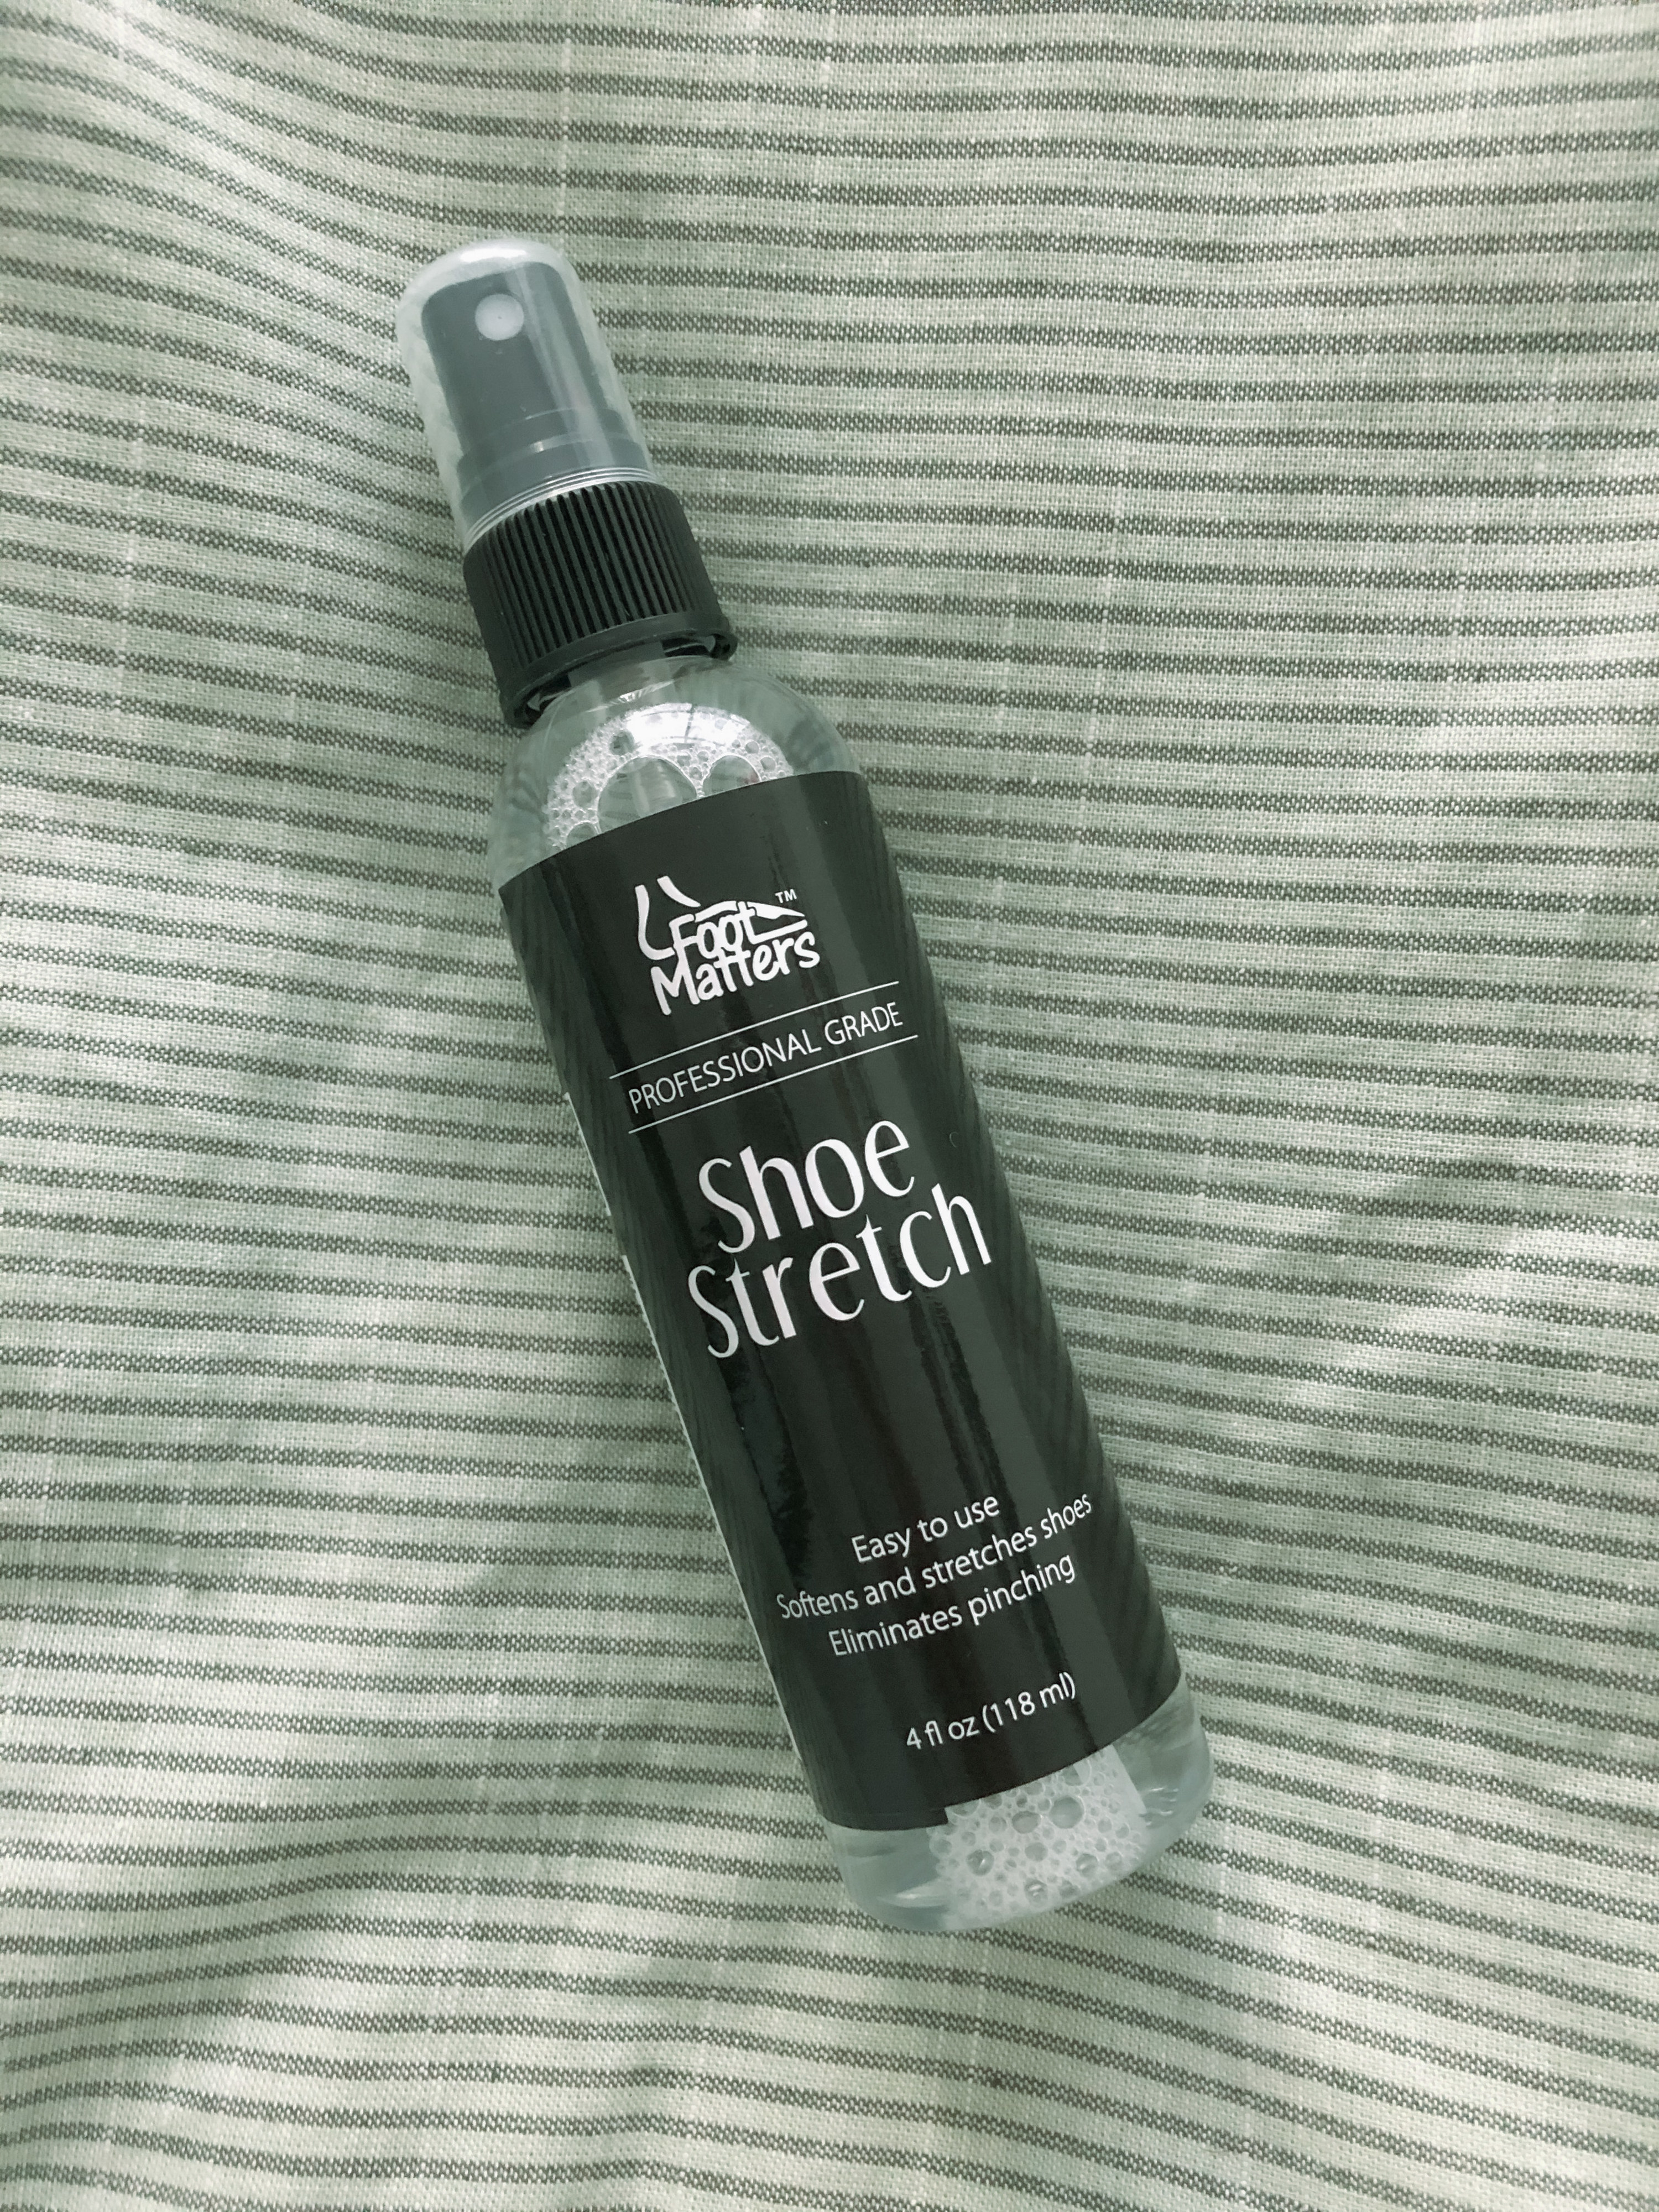 A bottle of the shoe stretch spray is seen on a soft fabric background